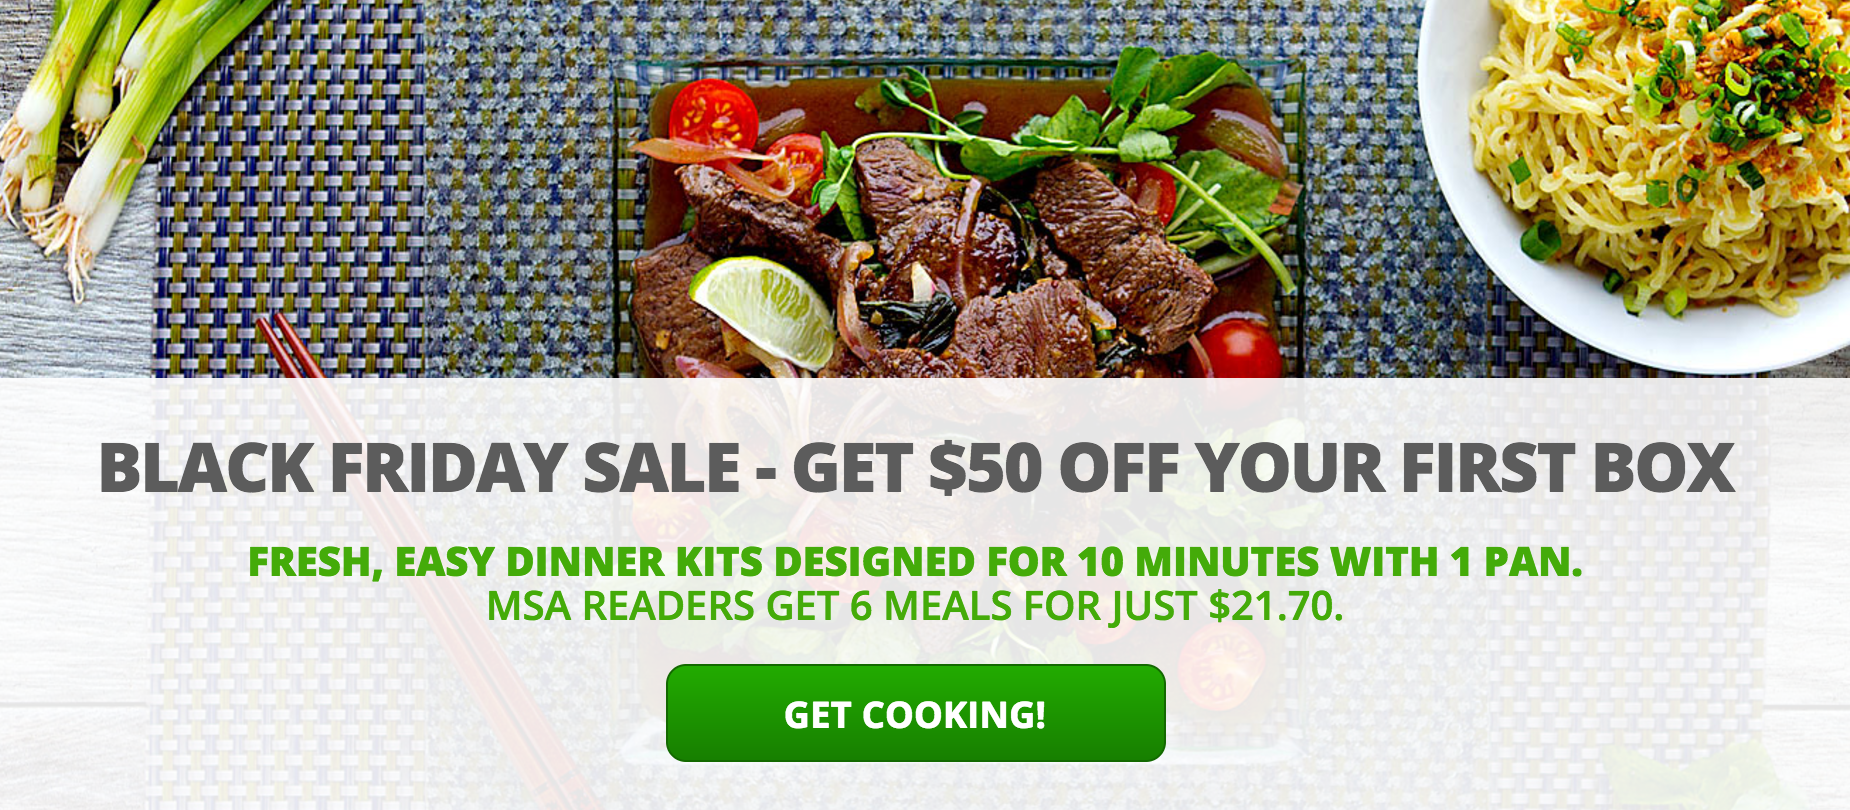 Gobble Meal Kit Exclusive Black Friday Deal – Get 6 Meals for $21.70!